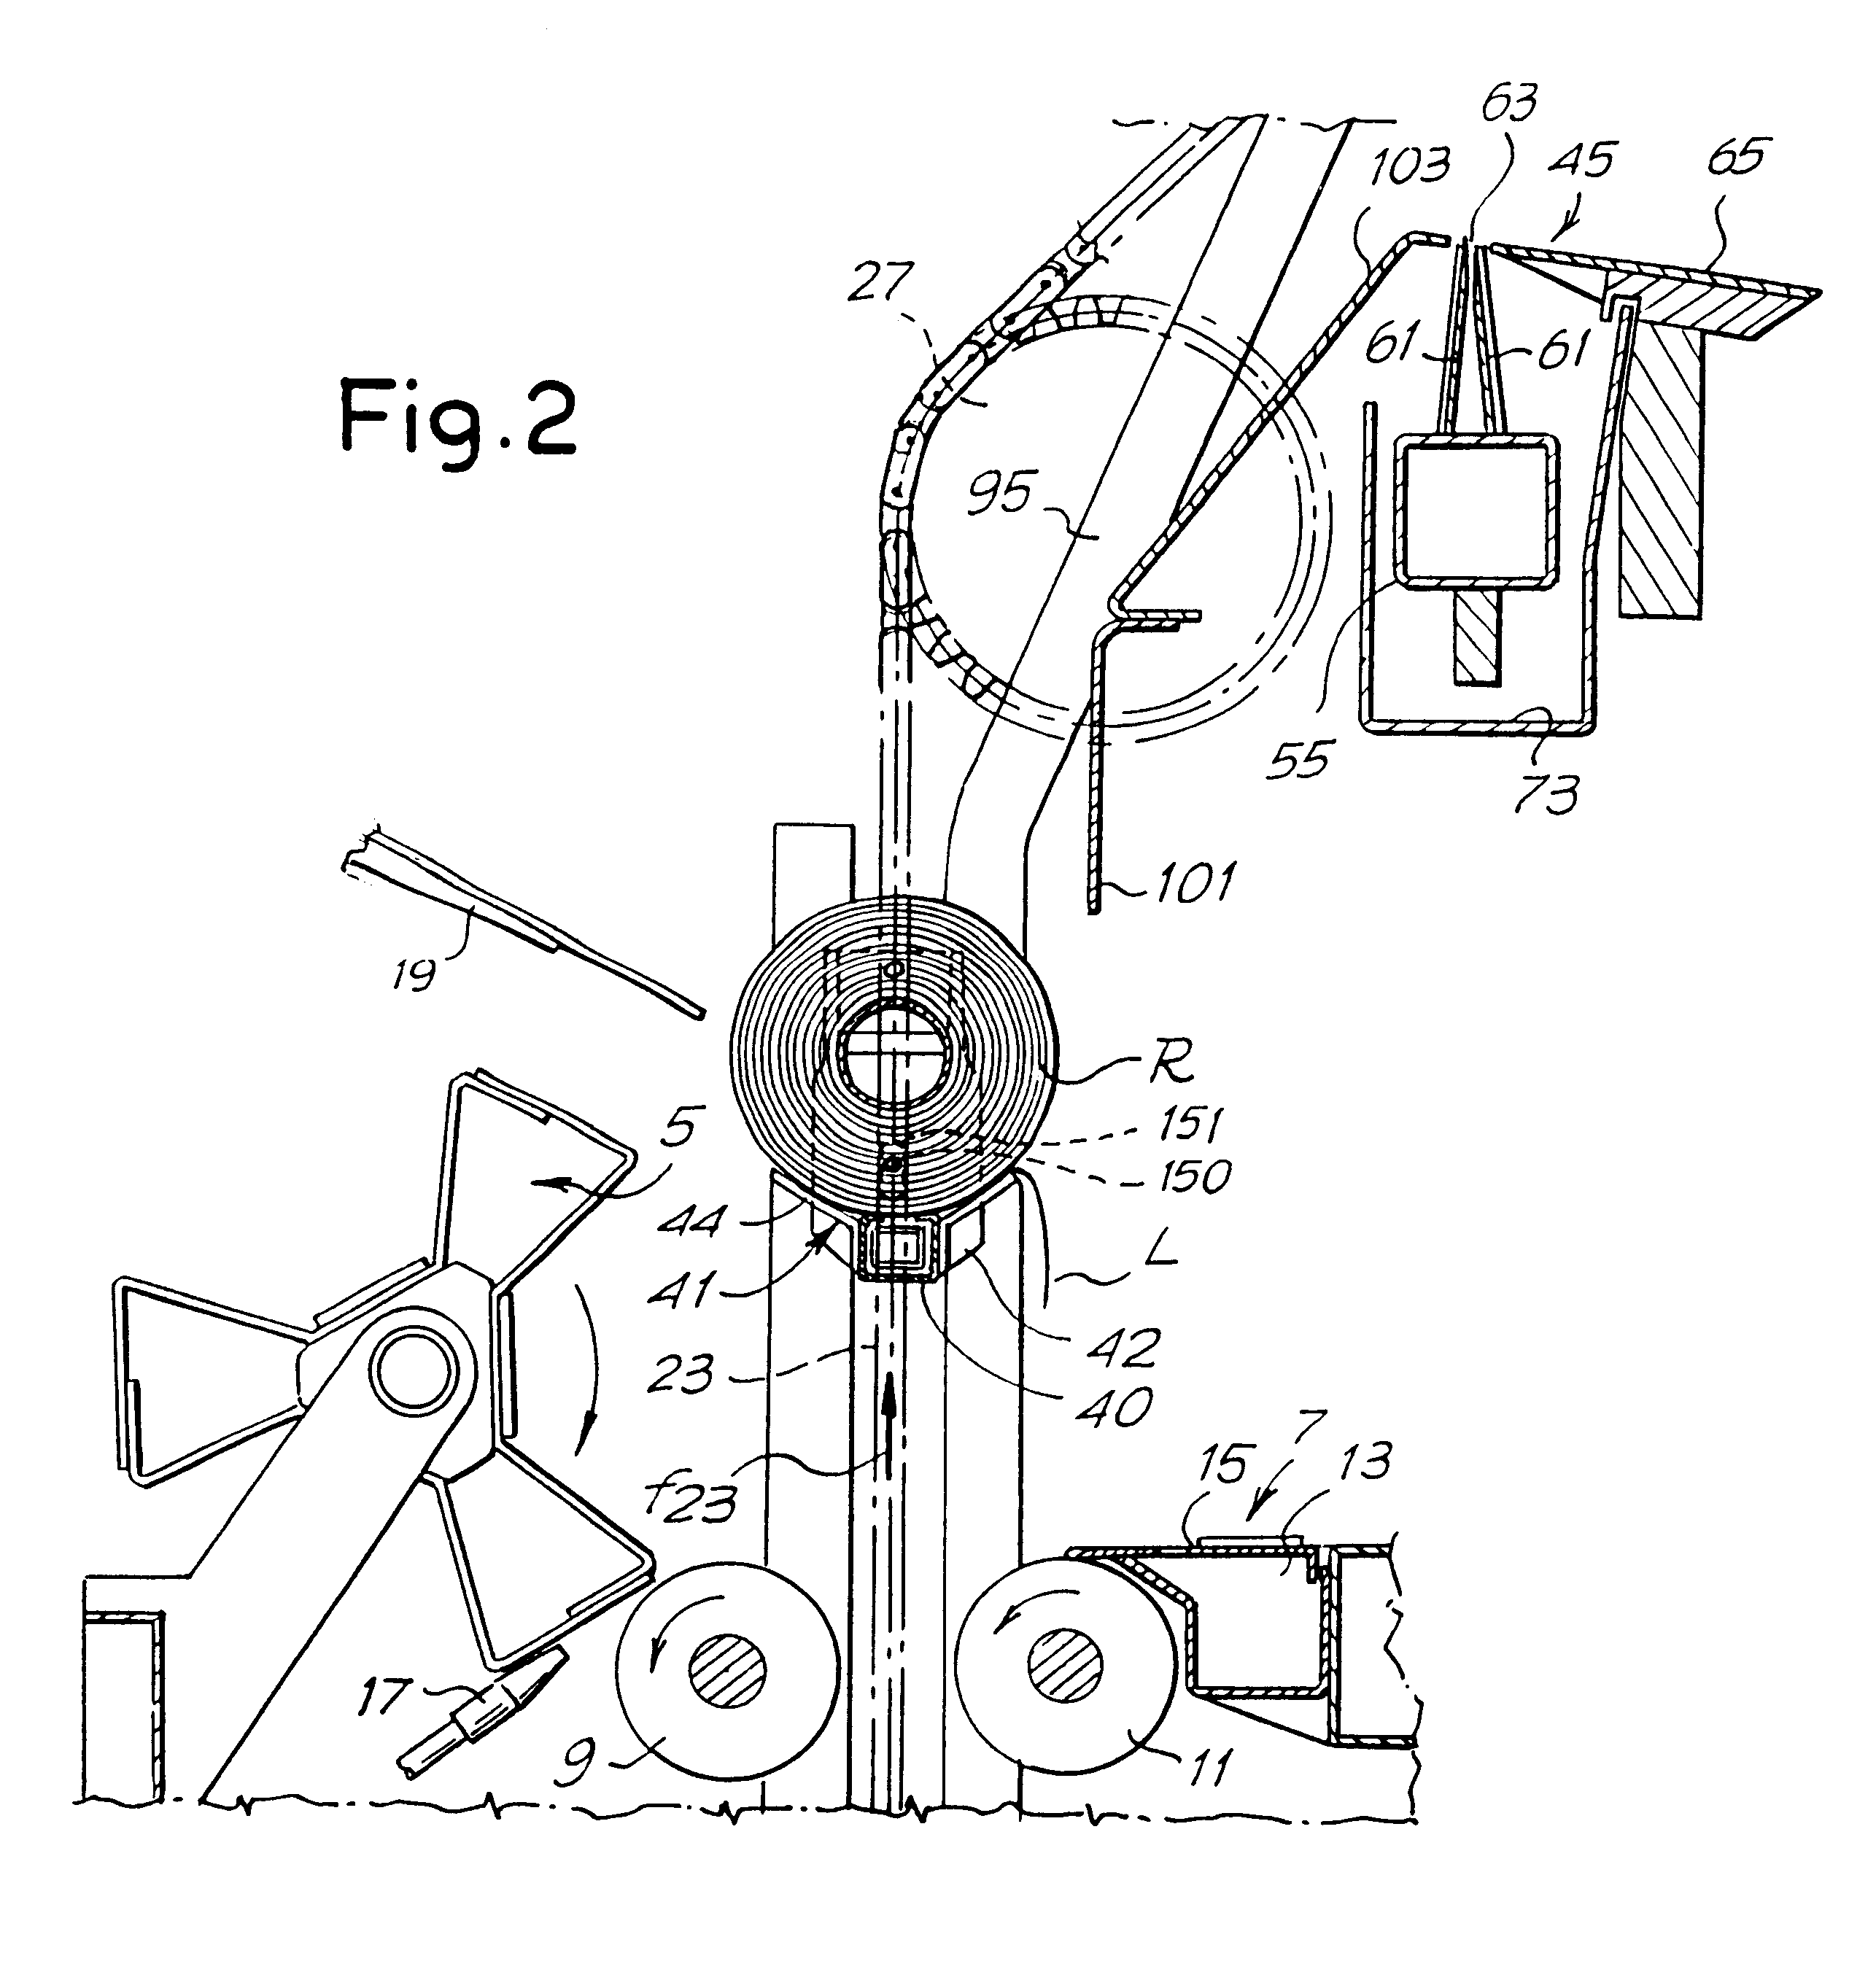 Apparatus for glueing the tail of a web to a log formed of the web material